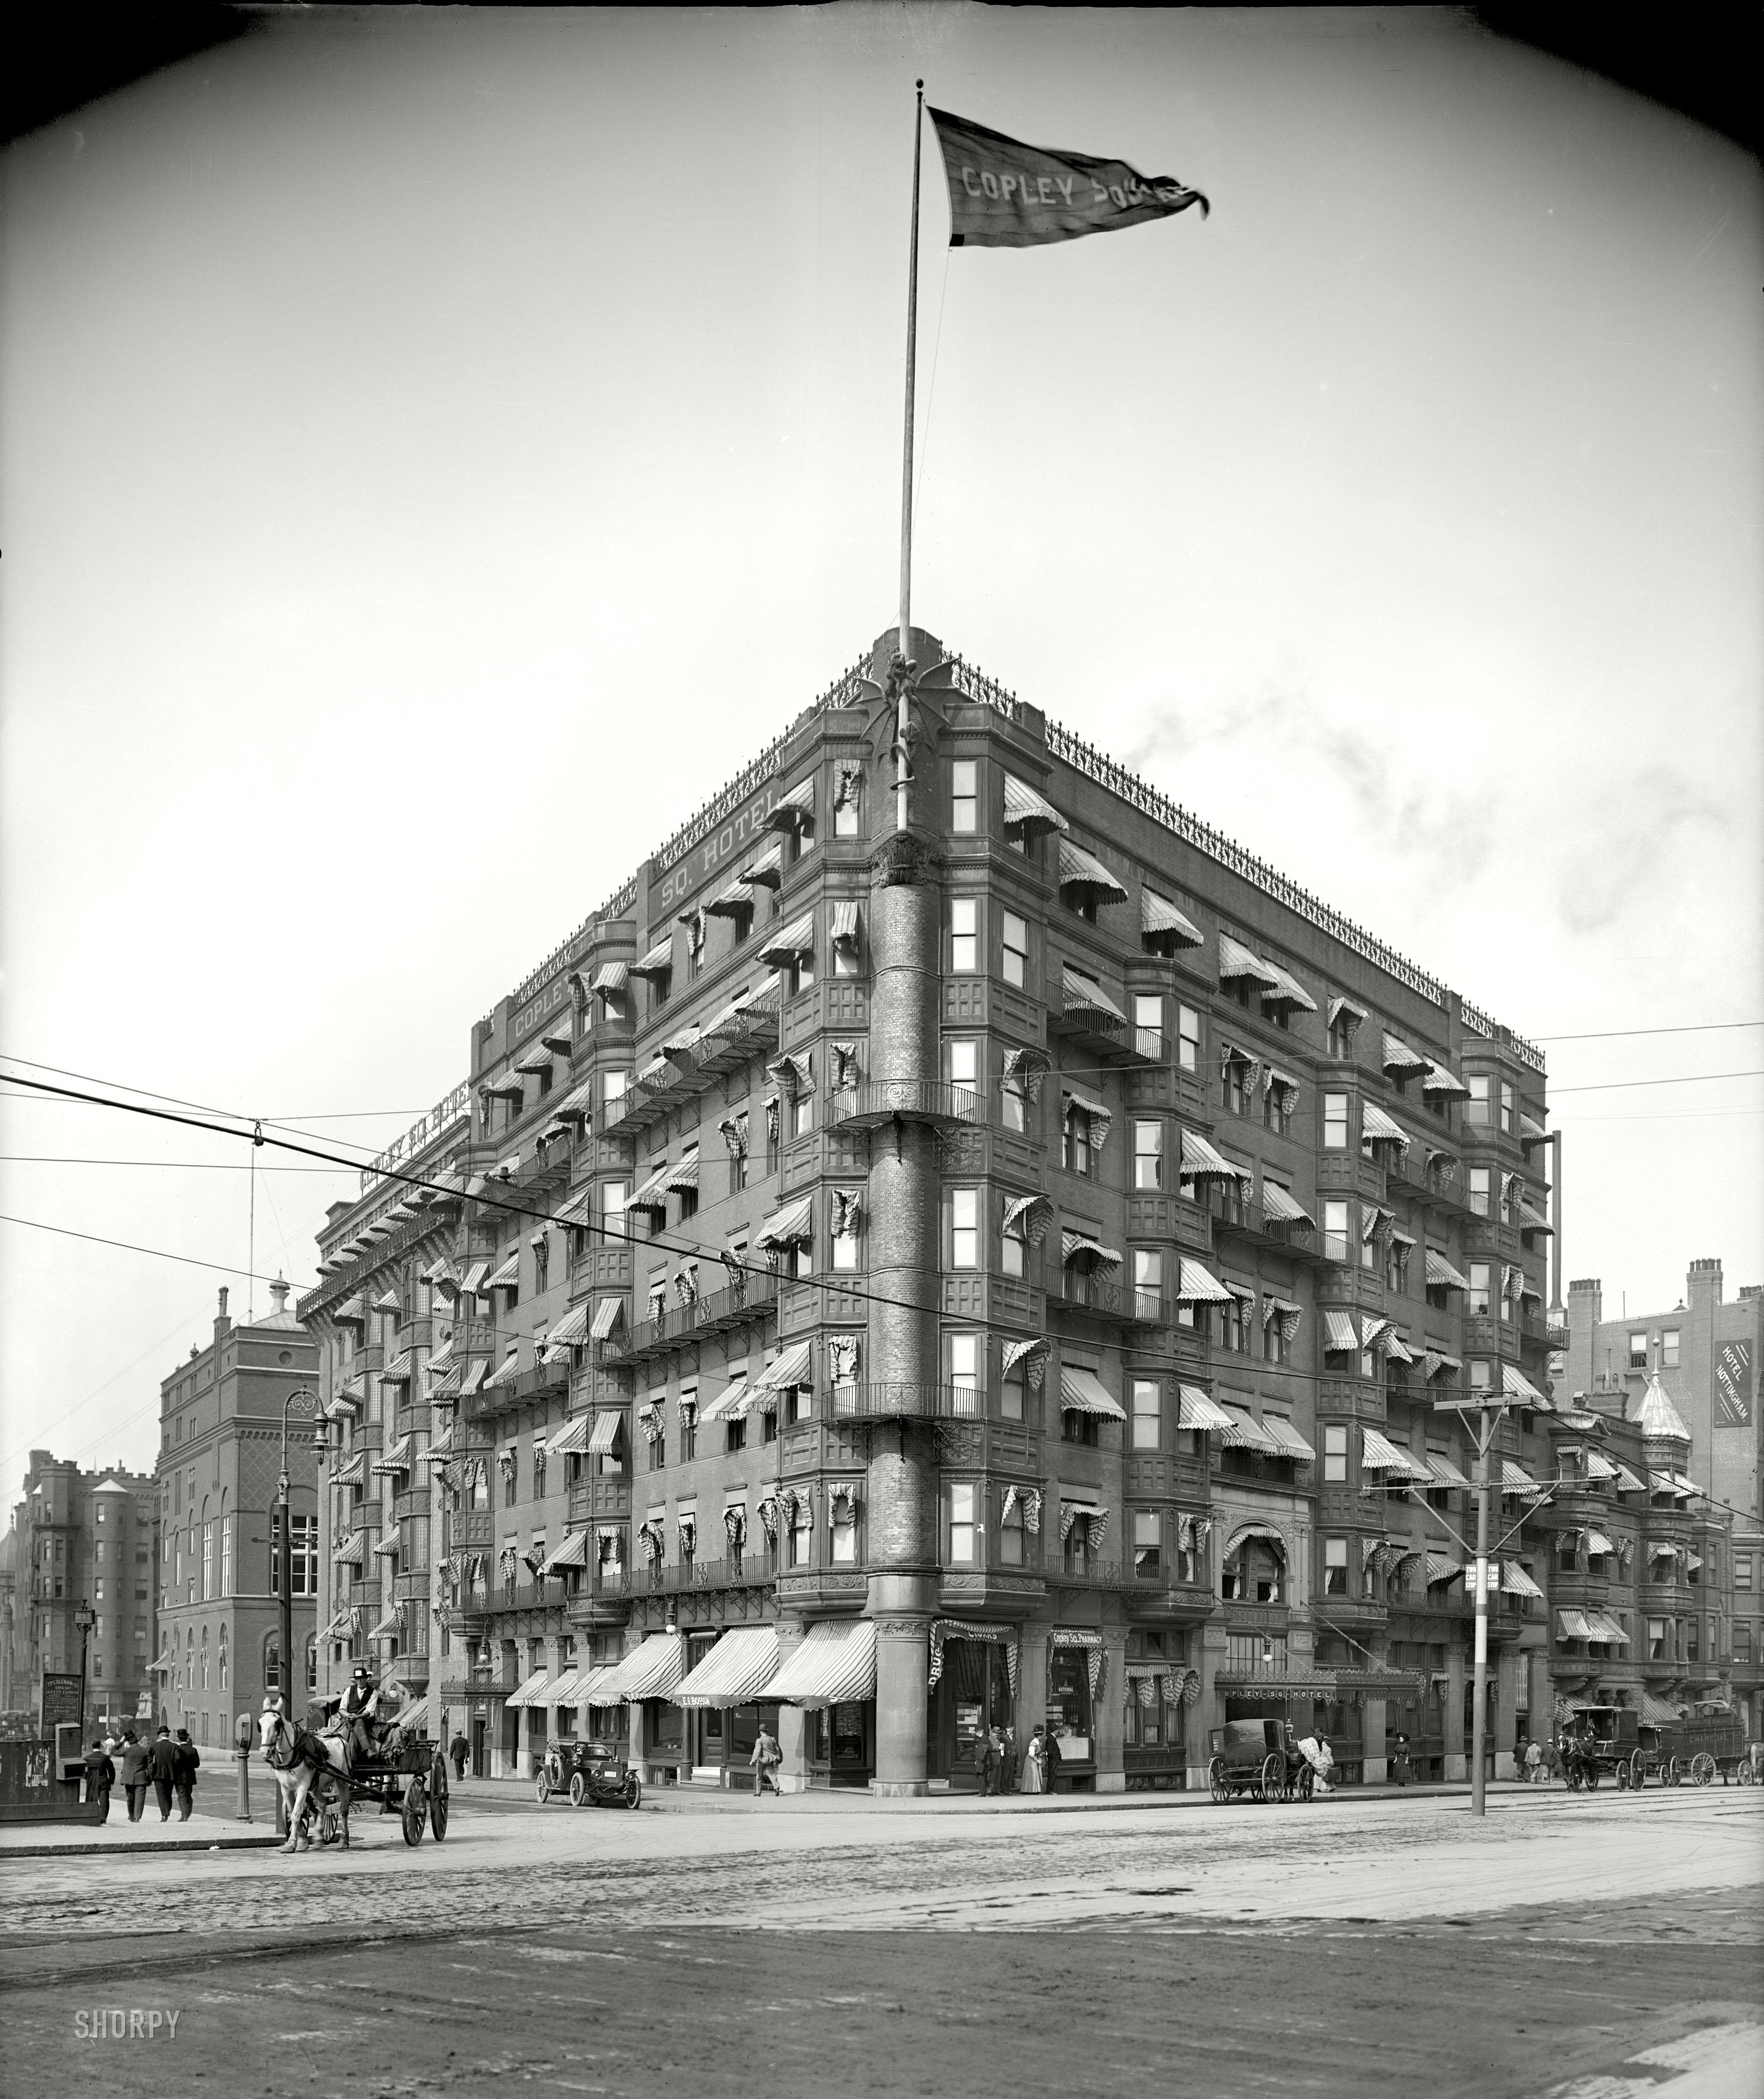 Boston, Massachusetts, circa 1909. "Copley Square Hotel." Check out the scaly mascot slithering up the flagpole. 8x10 inch glass negative. View full size.